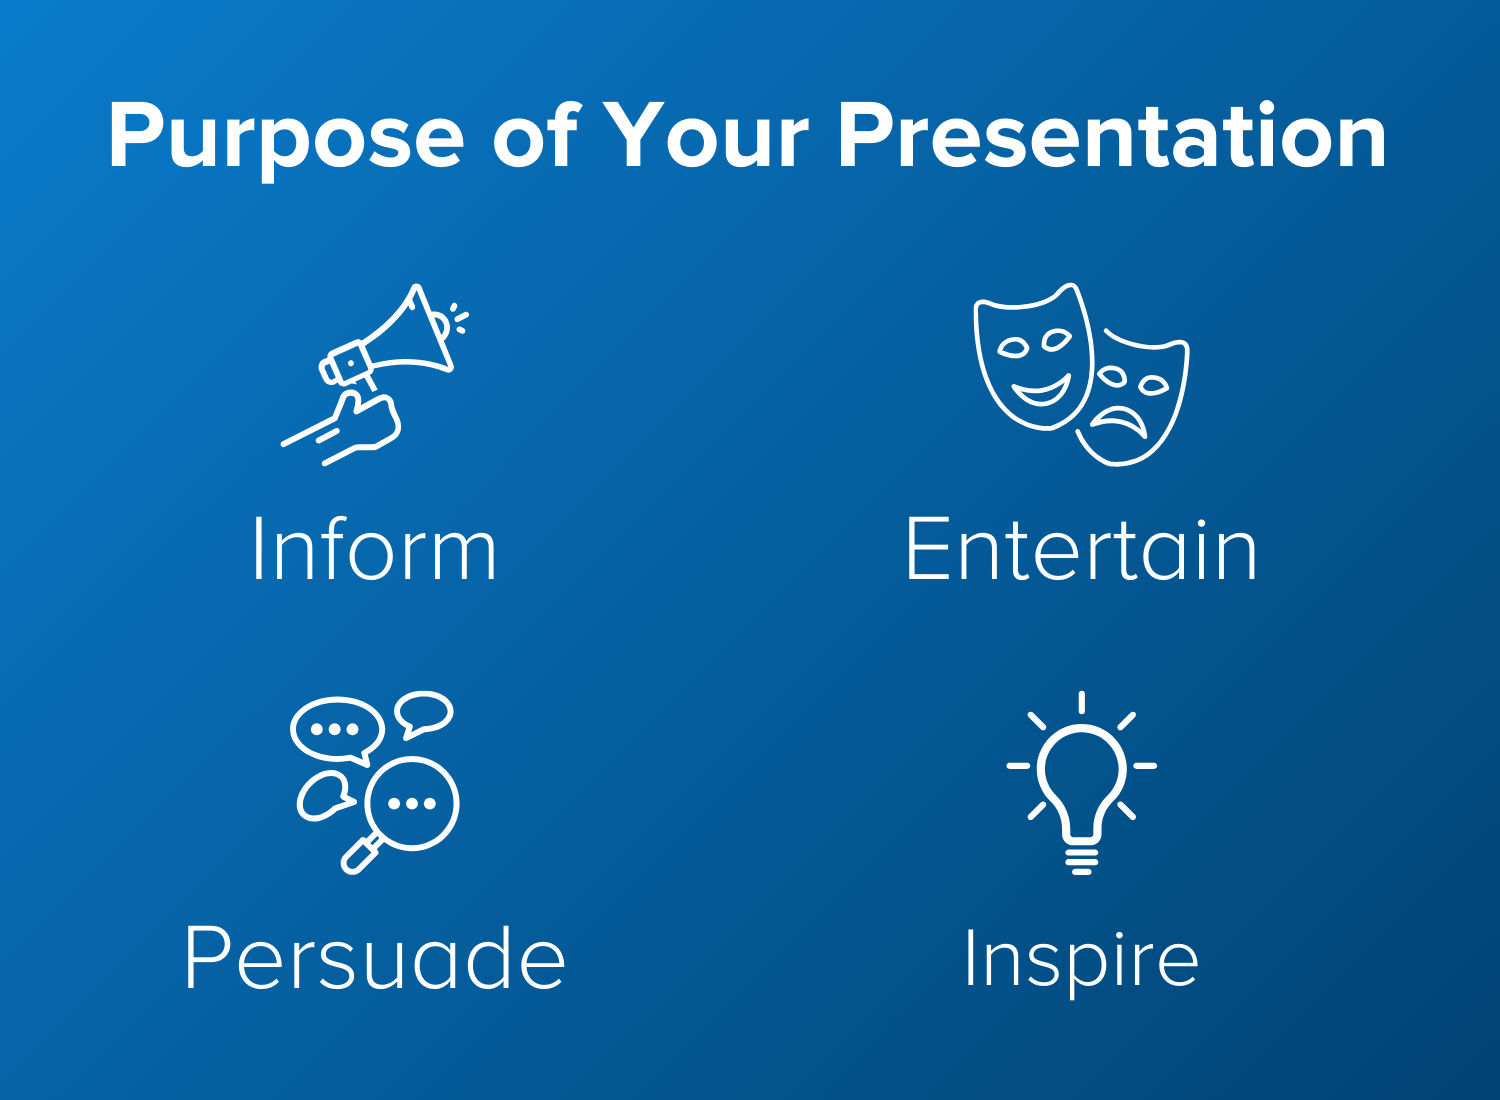 The purpose of your presentation is either to inform, entertain, persuade, or inspire